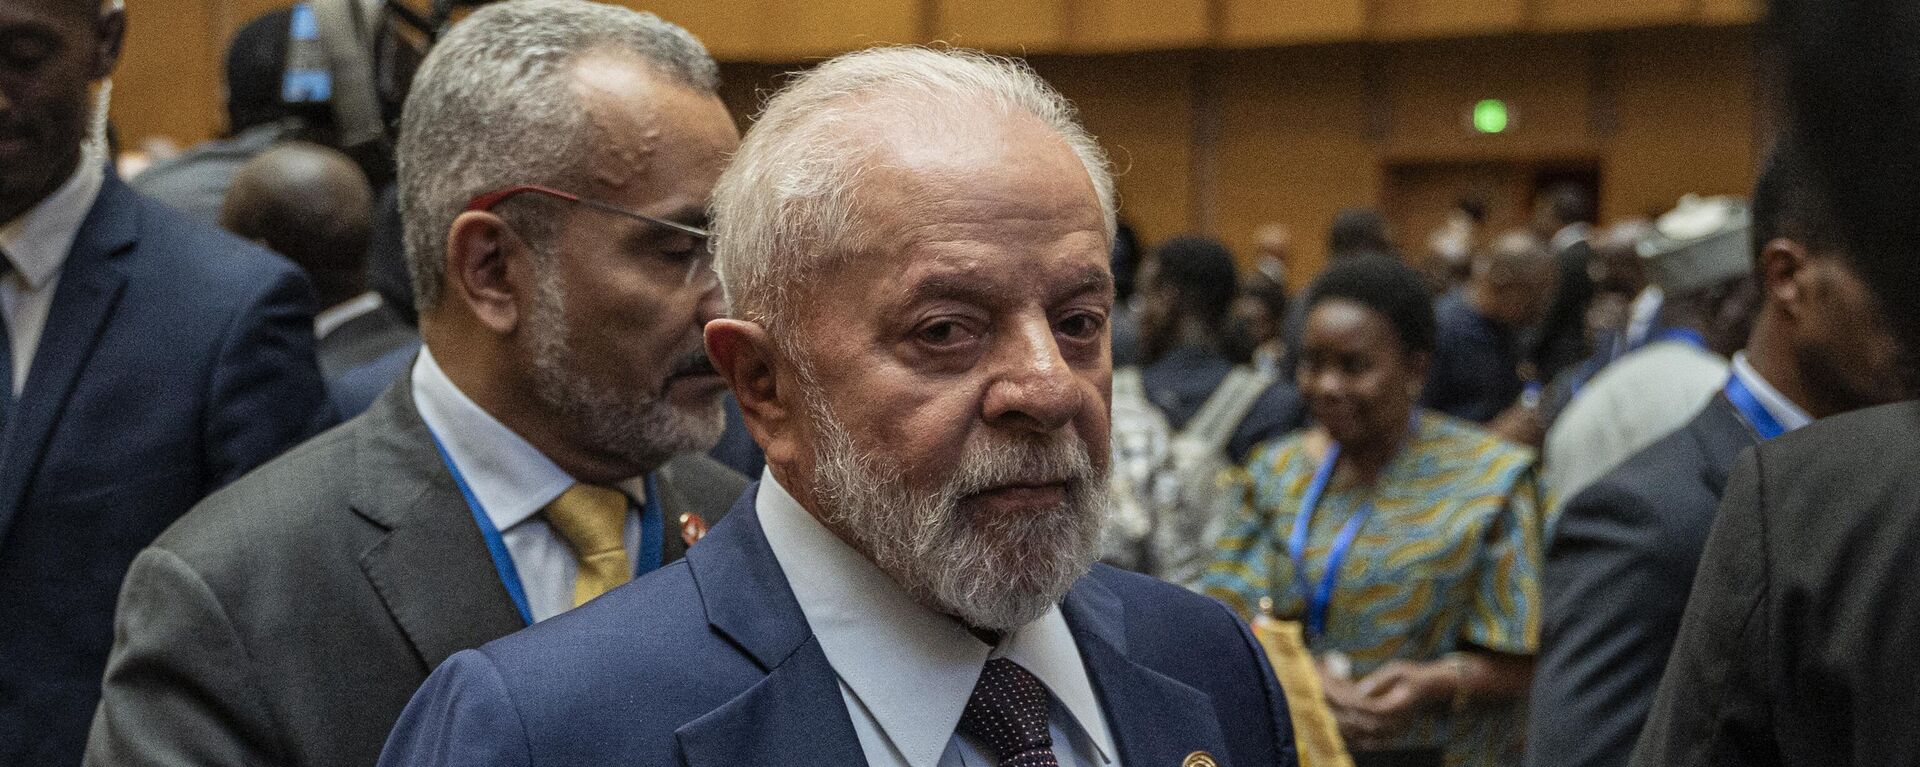 Brazilian President Luiz Inacio Lula da Silva arrives before the opening ceremony of the 37th Ordinary Session of the Assembly of the African Union (AU) at the AU headquarters in Addis Ababa on February 17, 2024. - Sputnik Africa, 1920, 17.02.2024